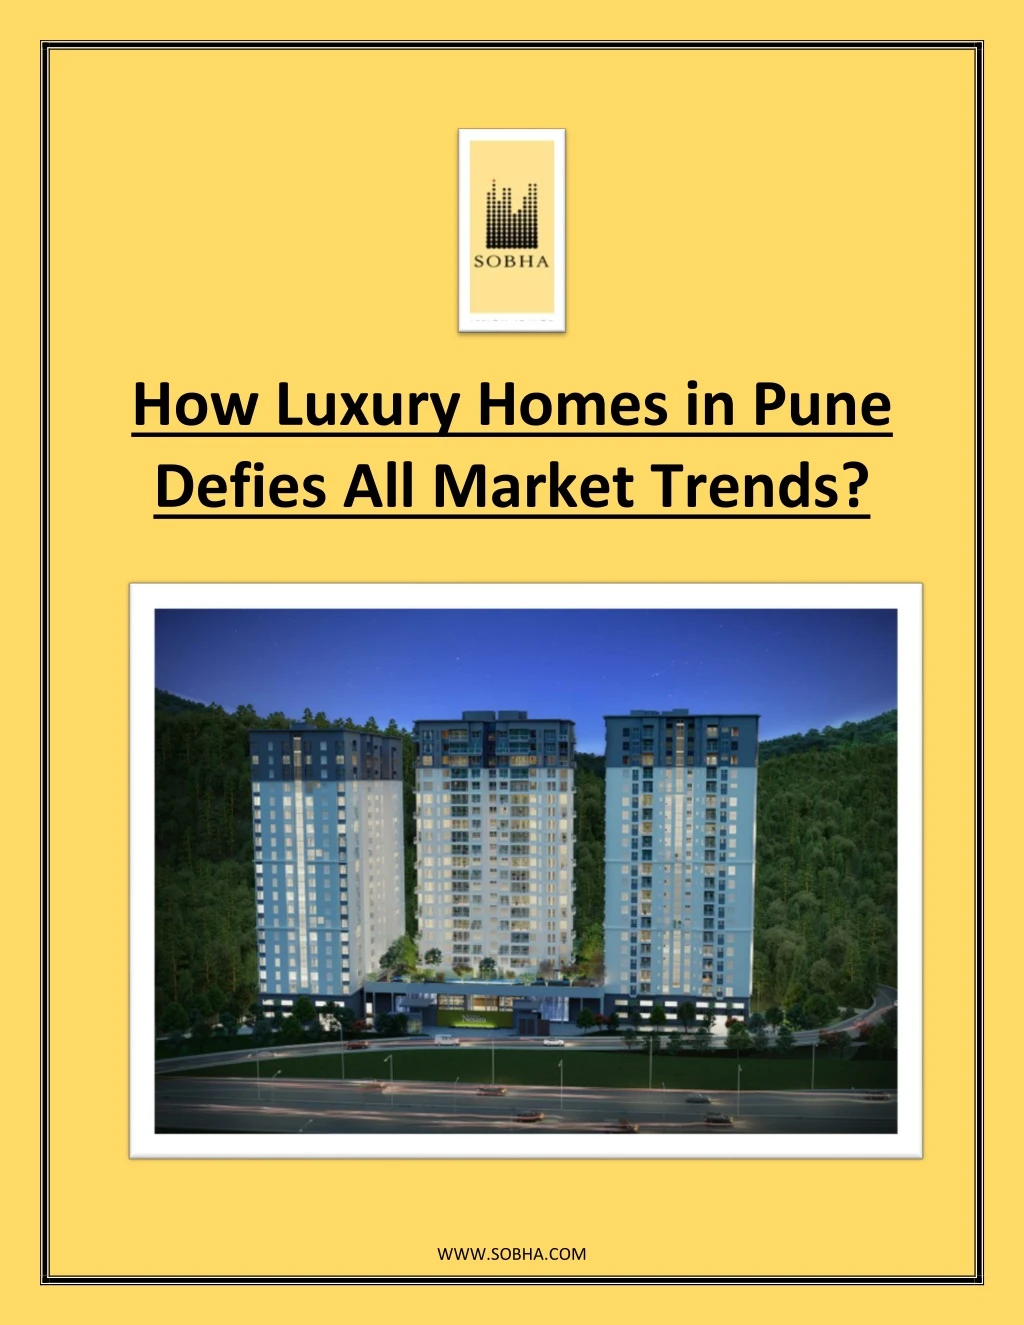 how luxury homes in pune defies all market trends